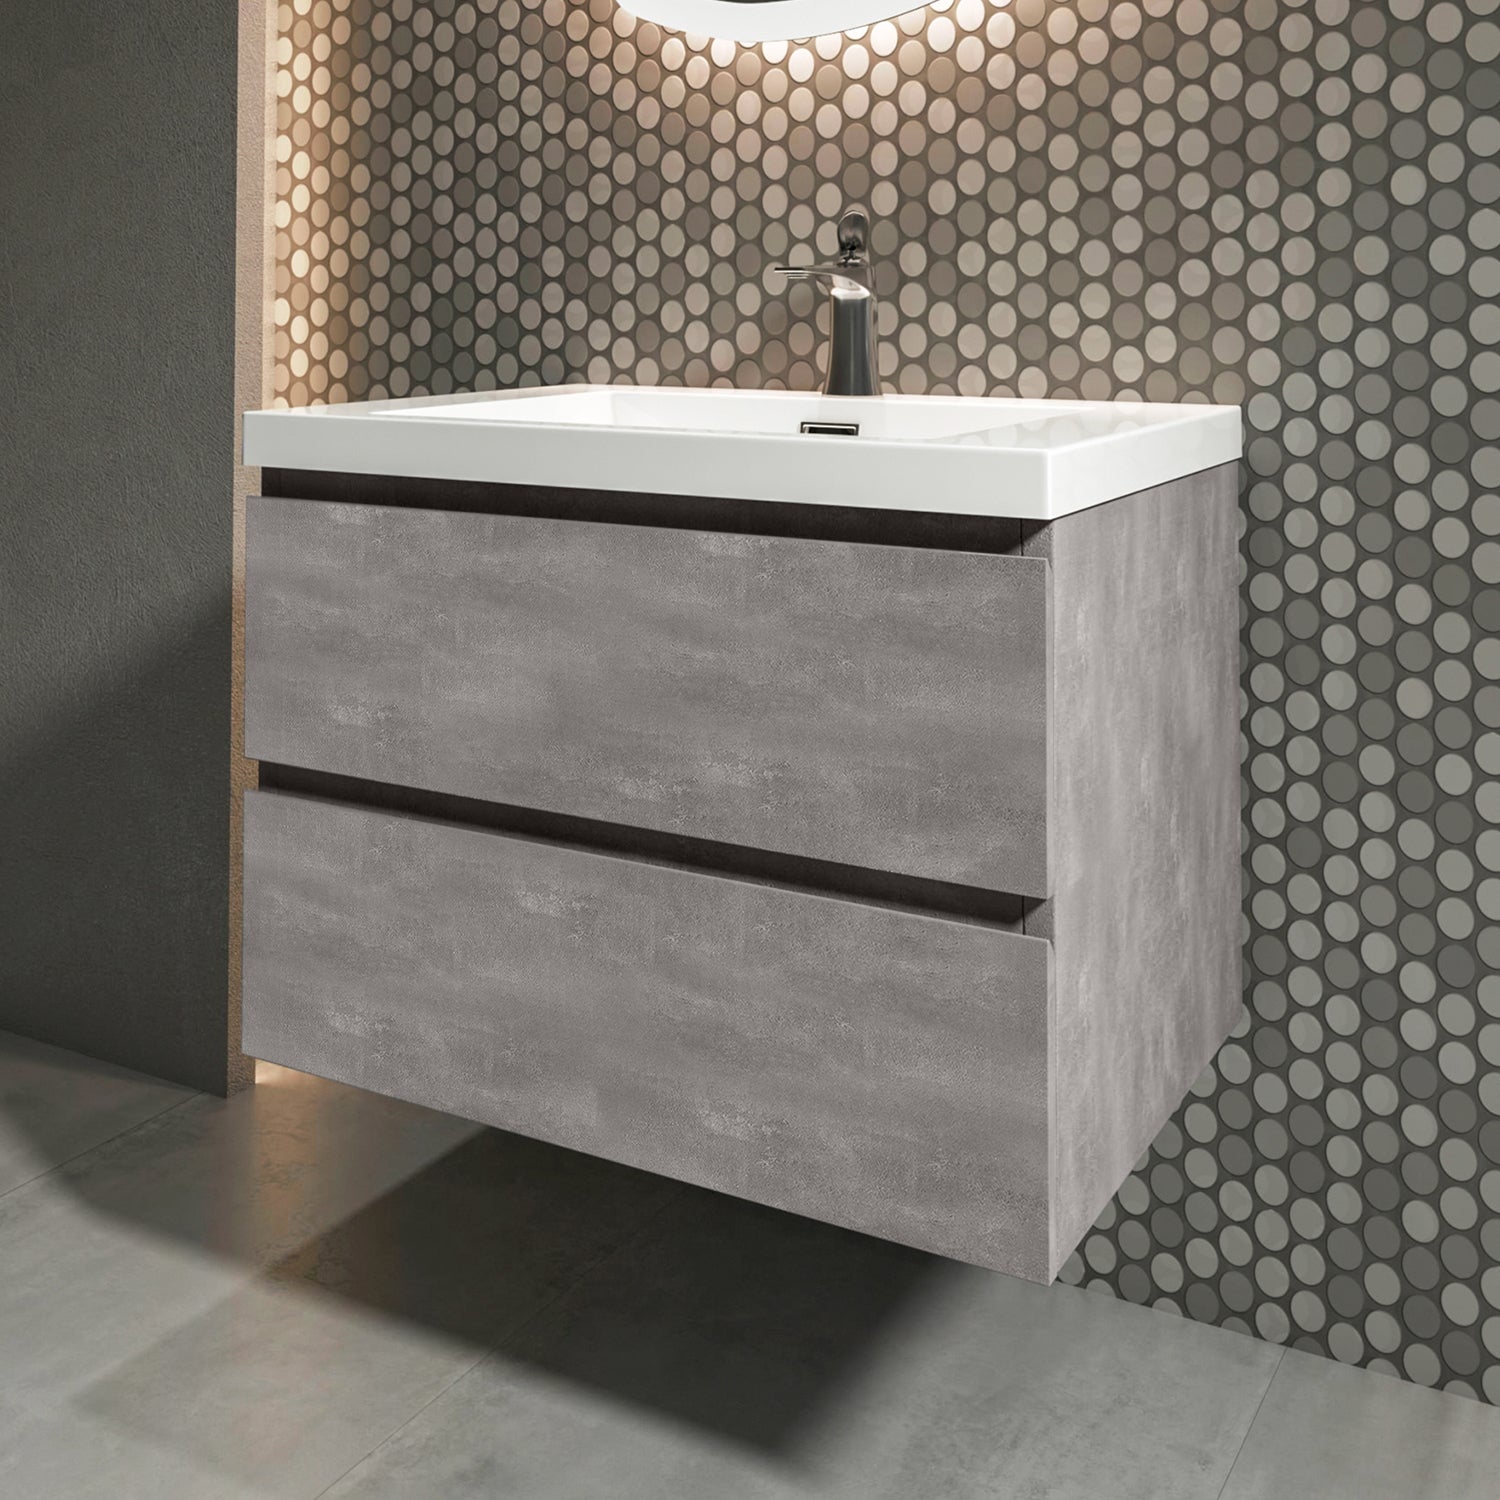 Sinber 30" Wall Mounted Small Single Rectangular Sink Bathroom Vanity Cabinet with White Acrylic Countertop 2 Drawers, Compact and Elegant with Sleek Design for Modern Bathrooms